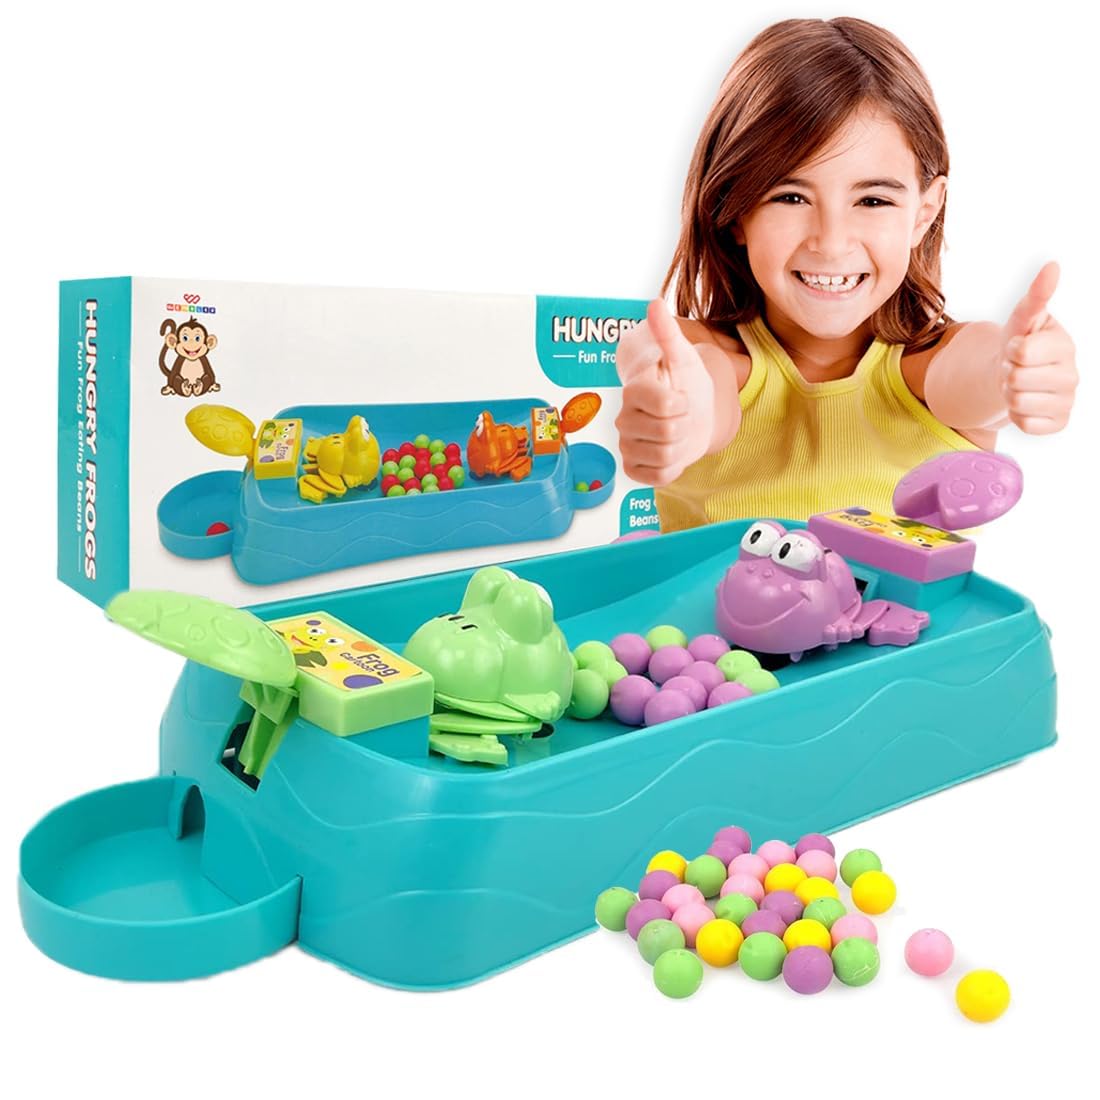 Braintastic Fun Hungry Frog Eating Beans Table Top Desktop Finger Toy Classic Board Game for Kids (2 Players)